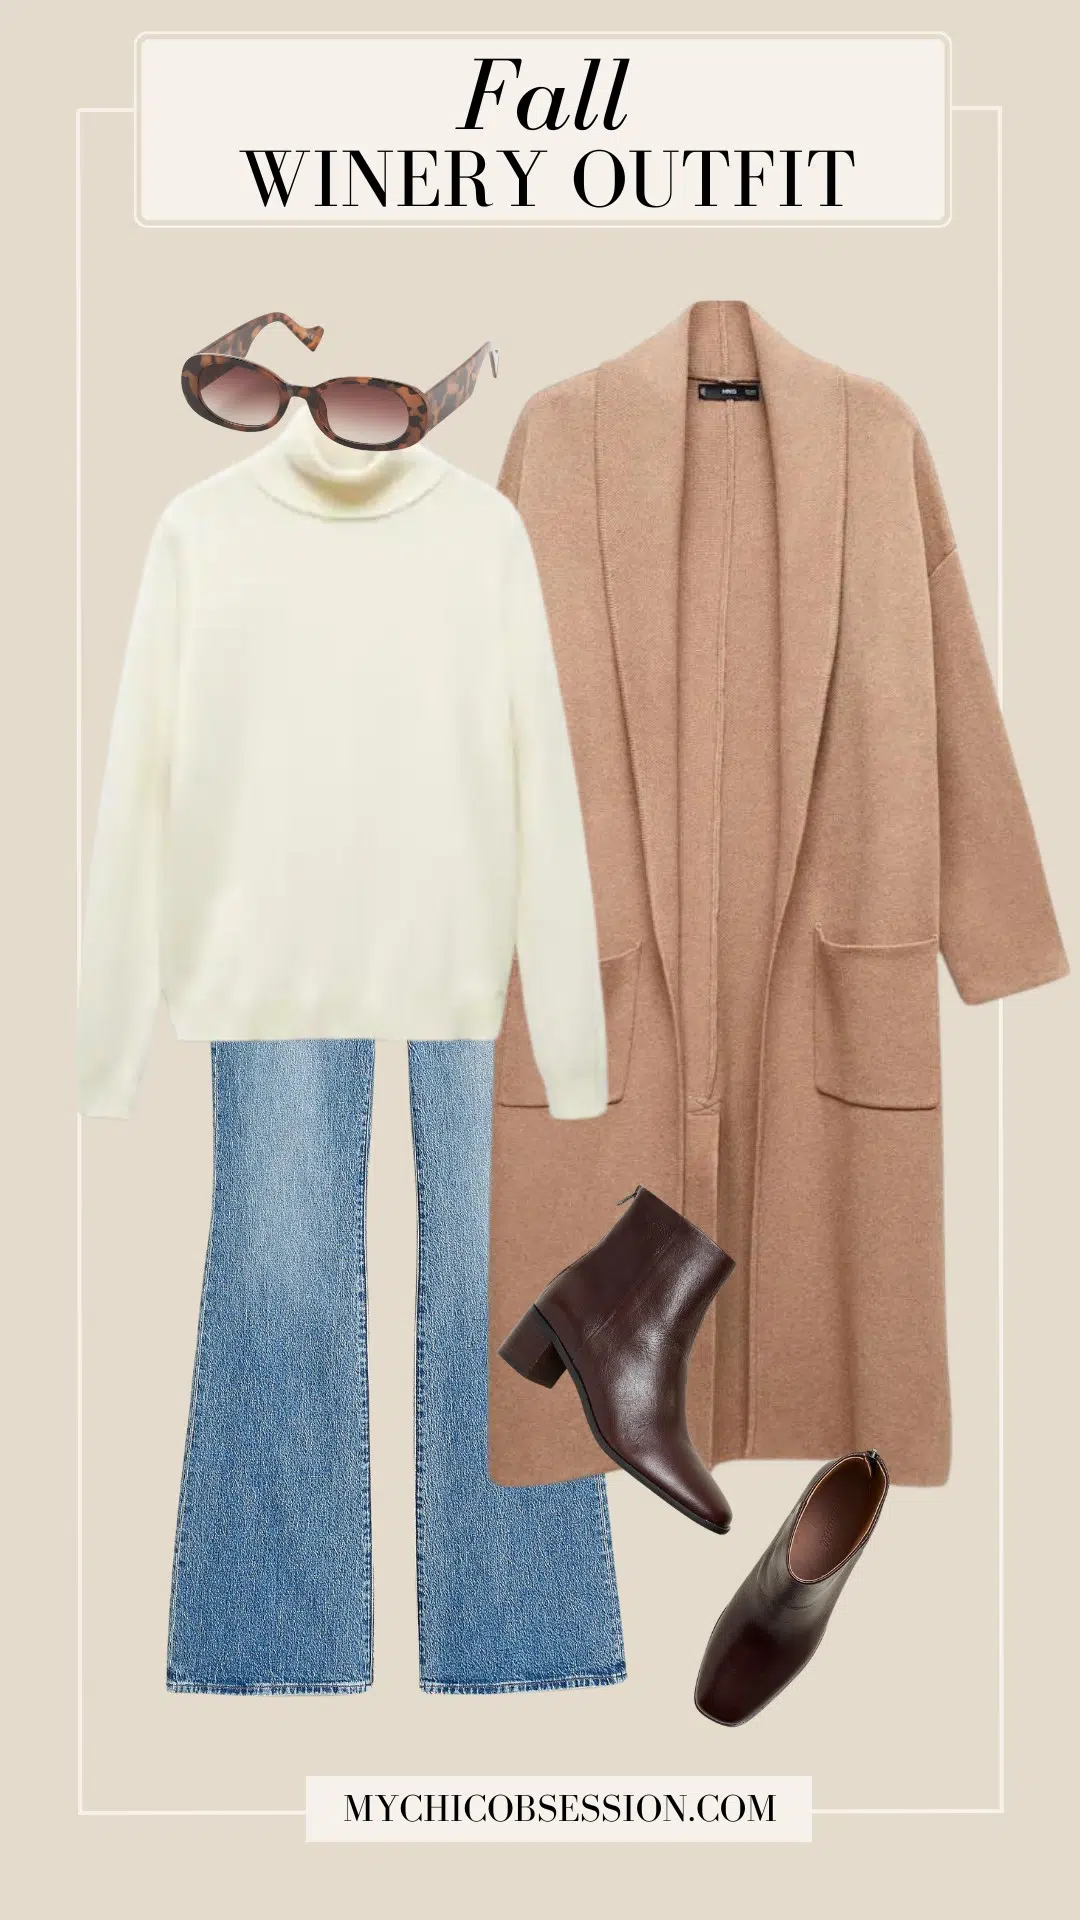 fall winery outfit camel cardigan coat cream turtleneck flared jeans ankle boots sunglasses